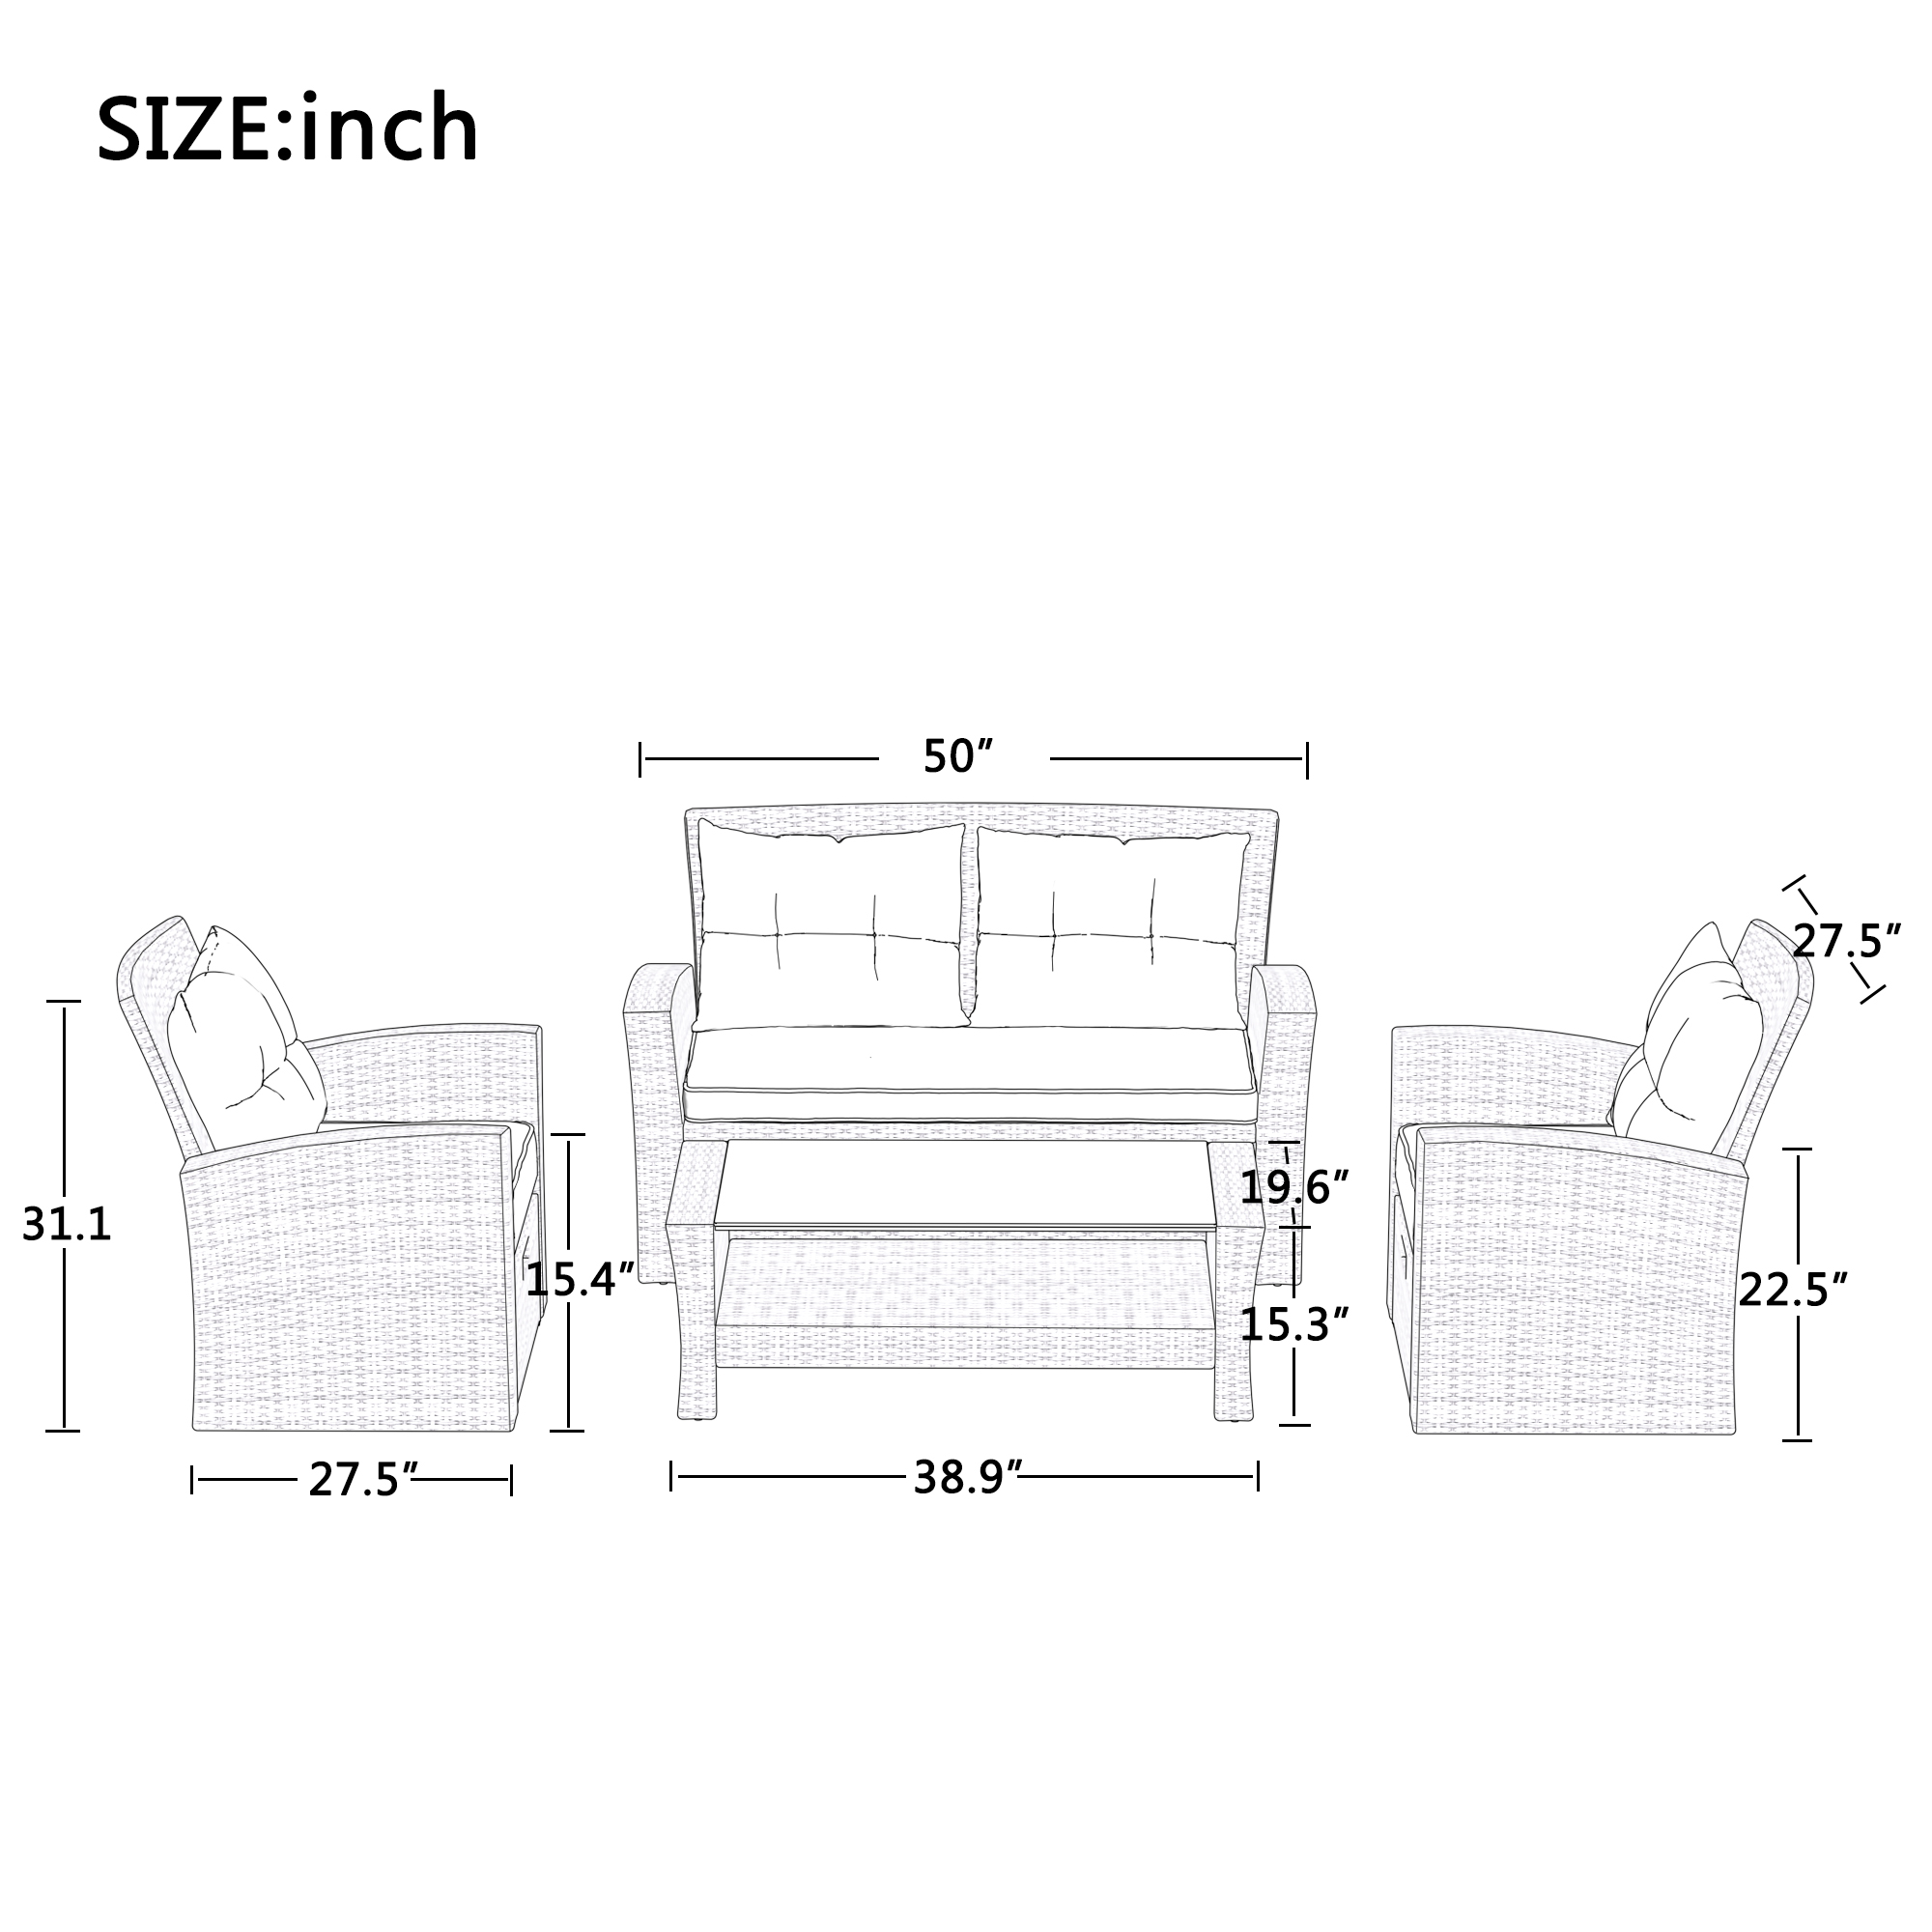 Gray Rattan Patio Sectional Set, SESSLIFE 6-Piece Outdoor Conversation Set with 1 Loveseat, 2 Chairs, 2 Ottomans, 1 Coffee Table, Patio Couches Sets for Porch Garden Balcony - image 3 of 9